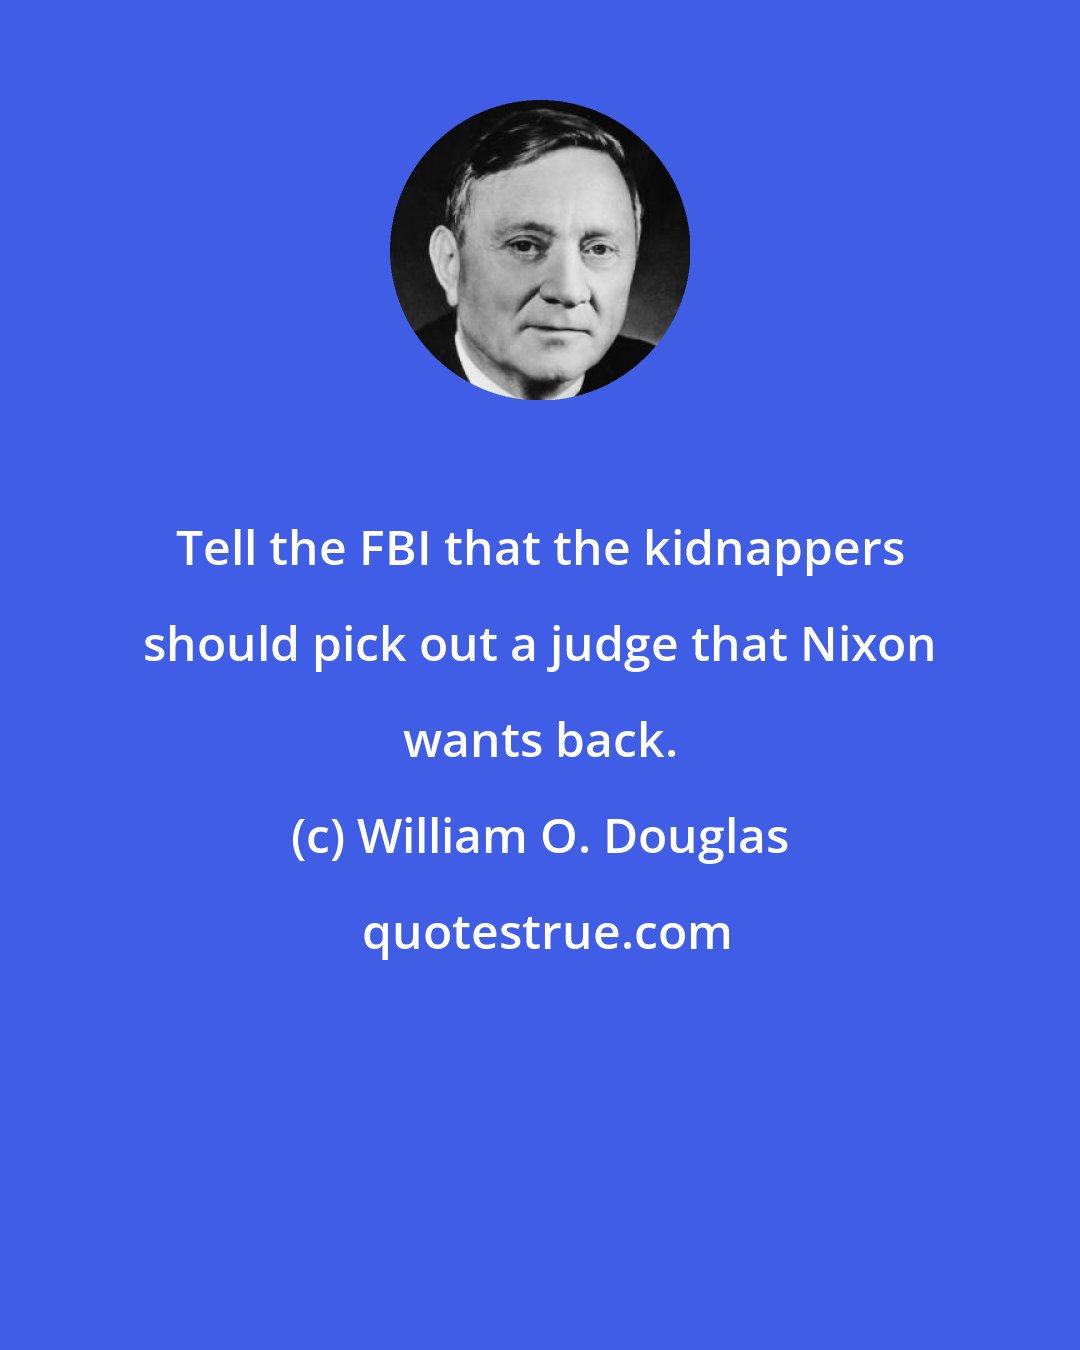 William O. Douglas: Tell the FBI that the kidnappers should pick out a judge that Nixon wants back.